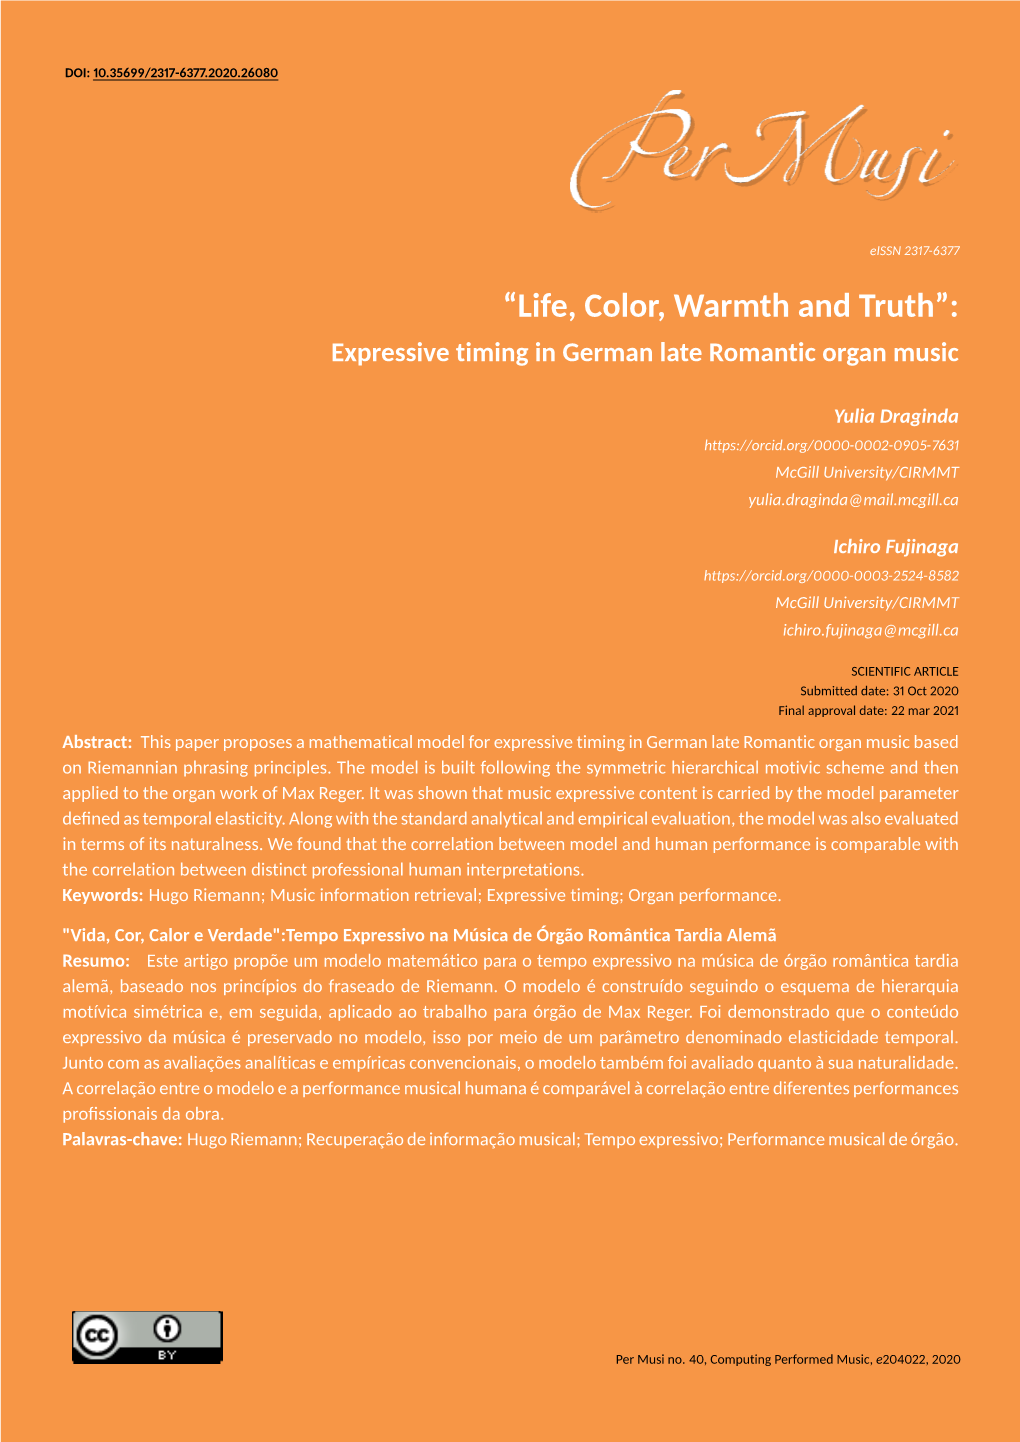 “Life, Color, Warmth and Truth”: Expressive Timing in German Late Romantic Organ Music